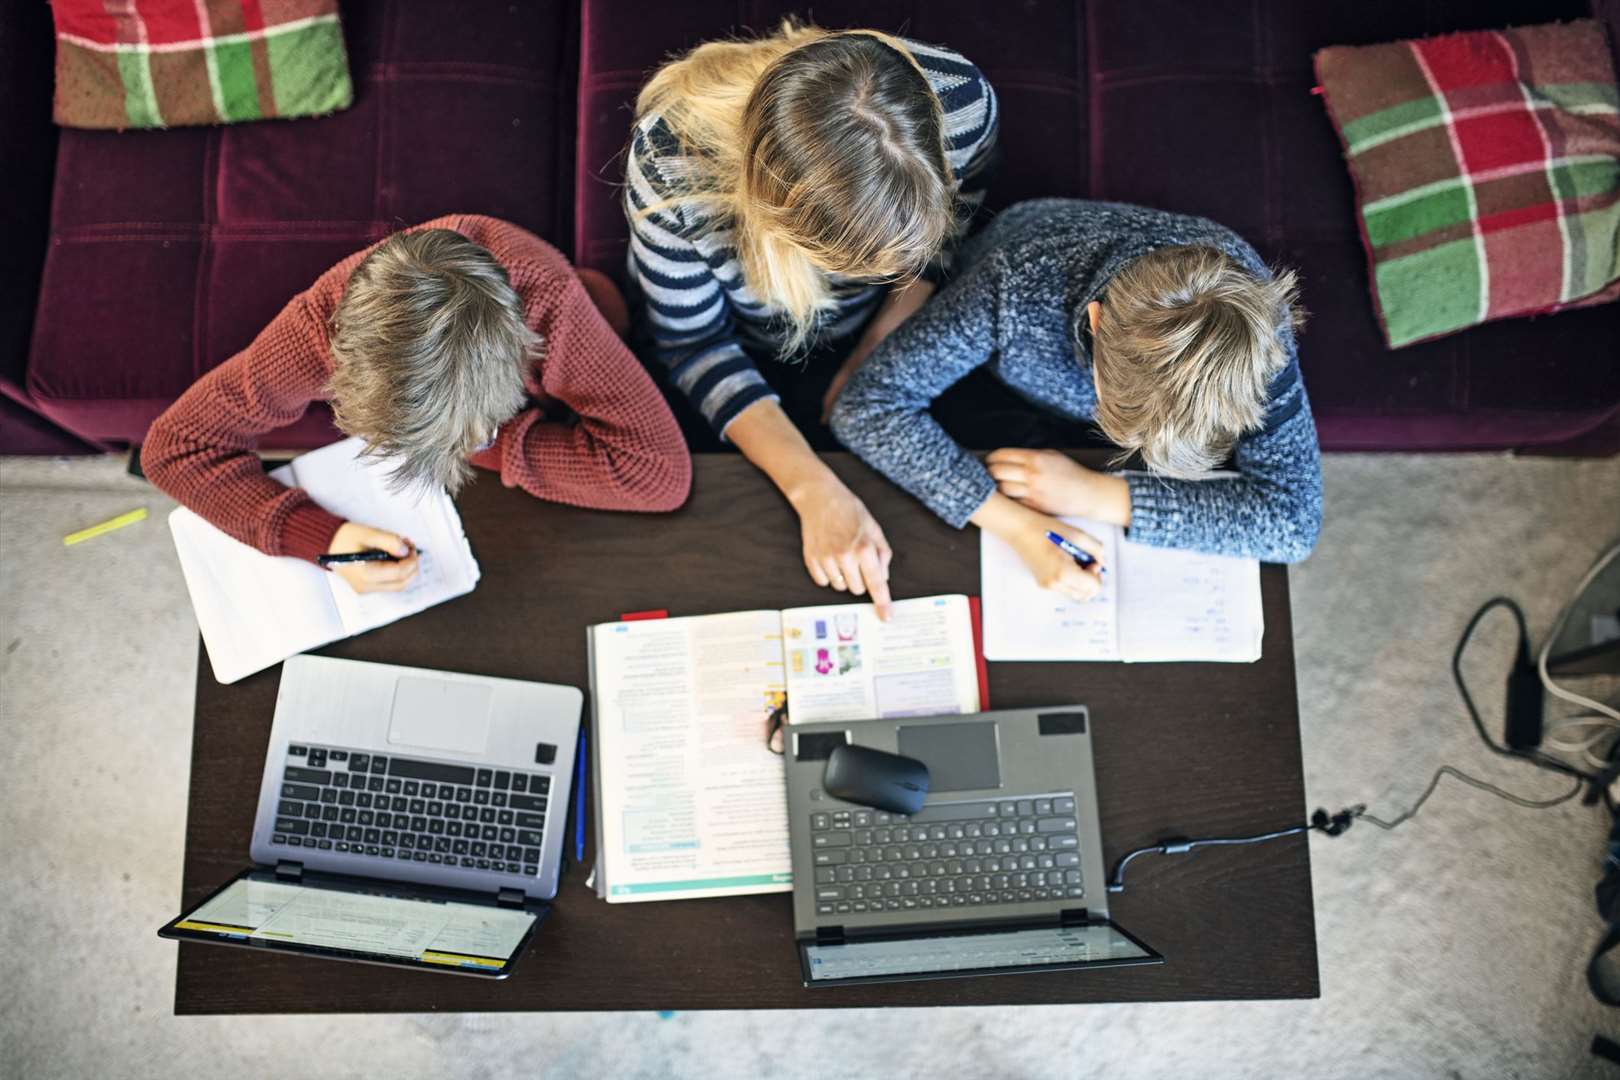 Mother helping sons with homeschooling at home during COVID-19 pandemic...Nikon D850. (44373313)